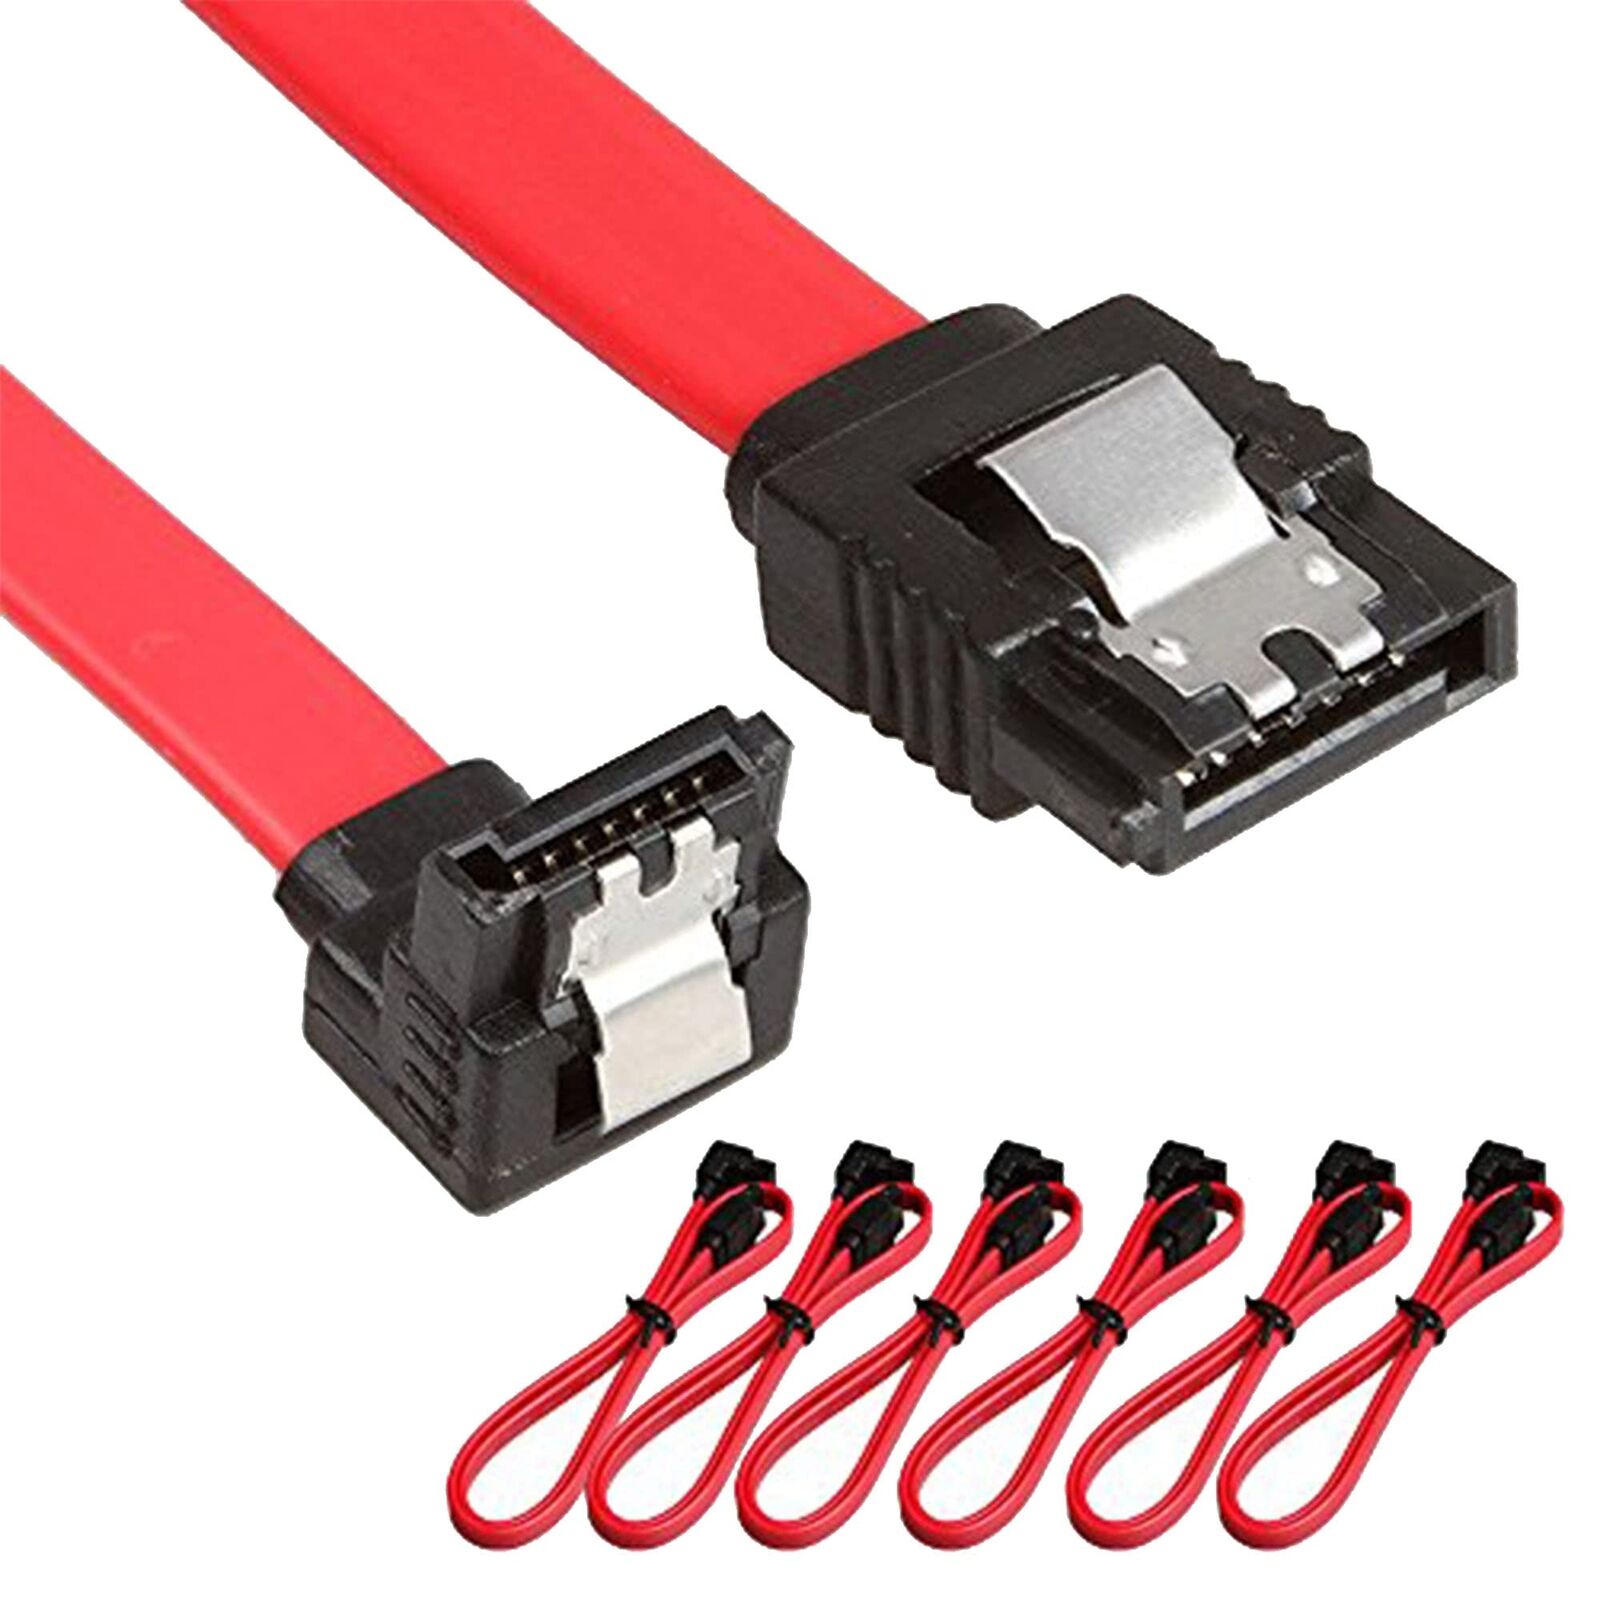 6 Pack 90 Degree Right-Angle SATA III Cable 6.0 Gbps with Locking Latch 18Inc...